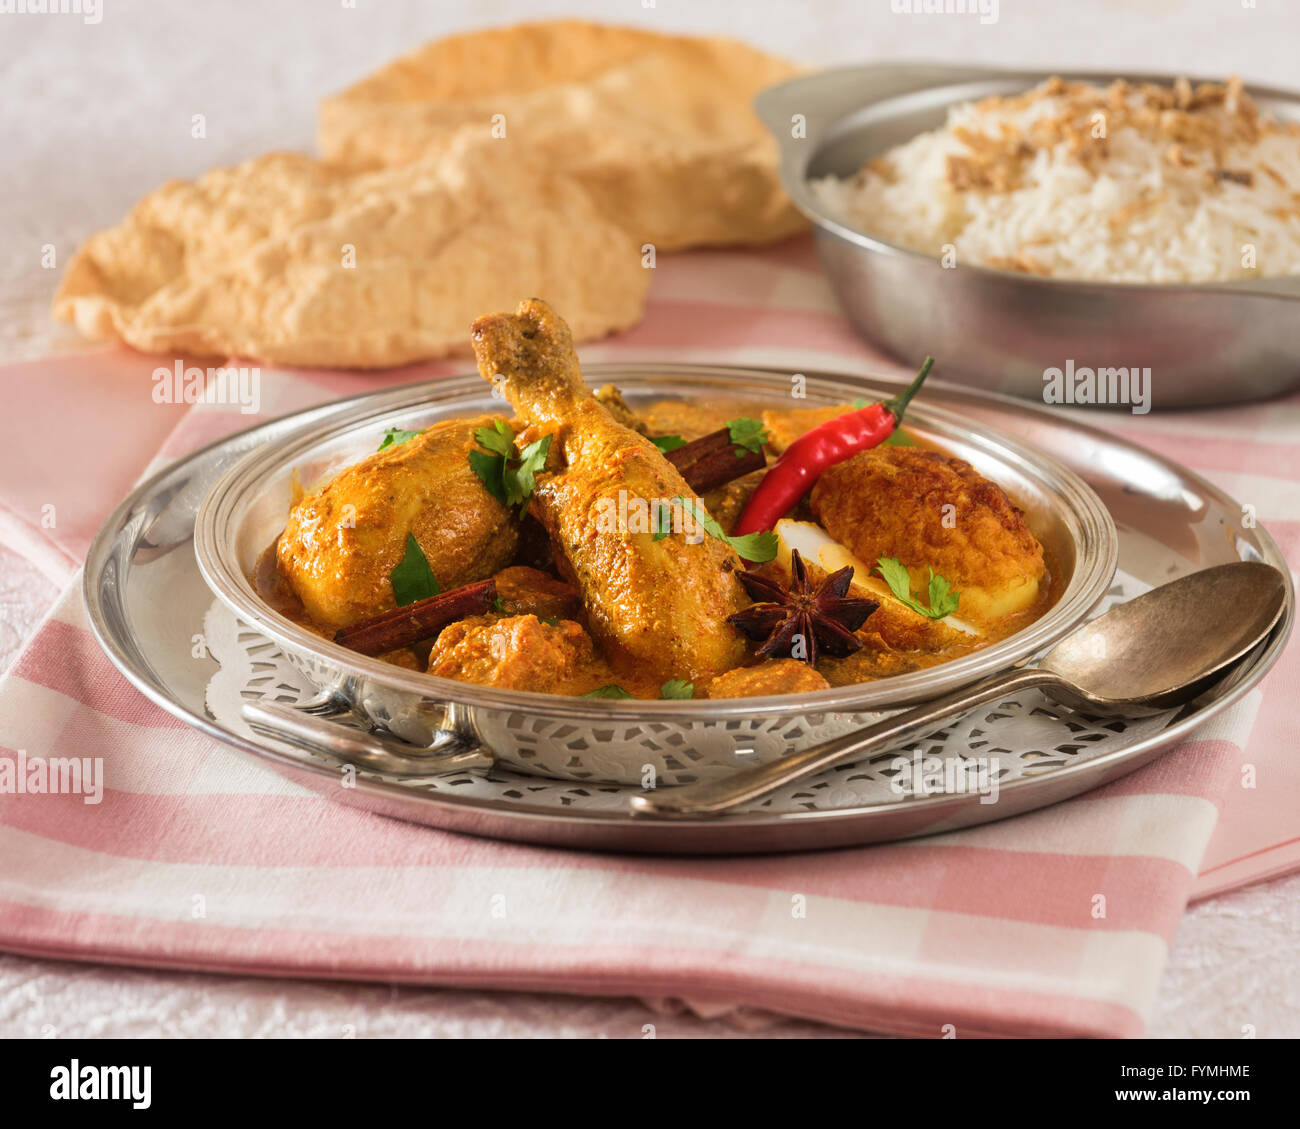 DAK-Bungalow-Hühnchen-Curry. Anglo-indische Küche Stockfoto